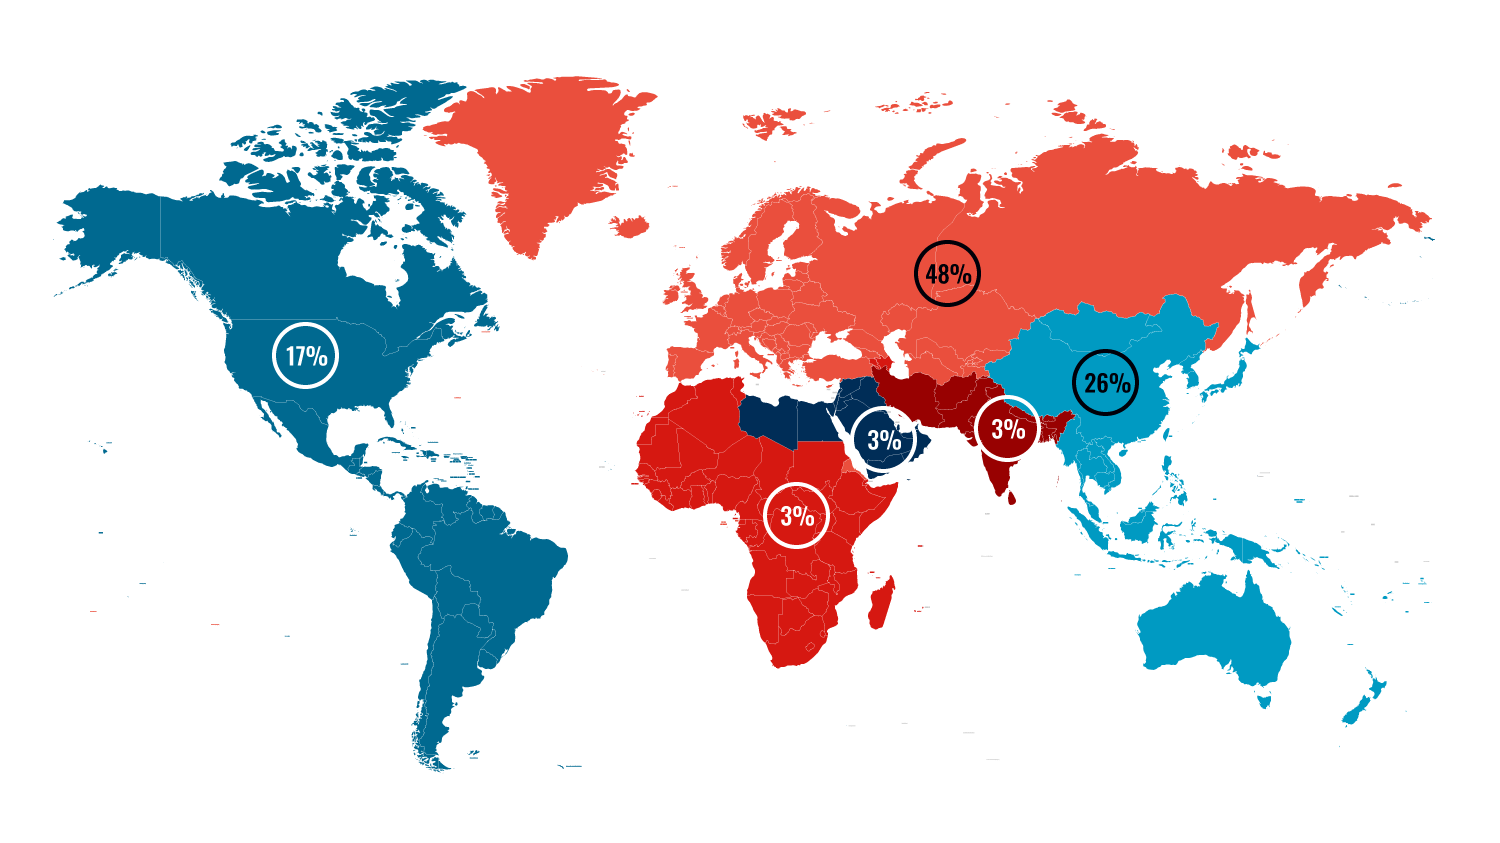 outbound tourism by region map